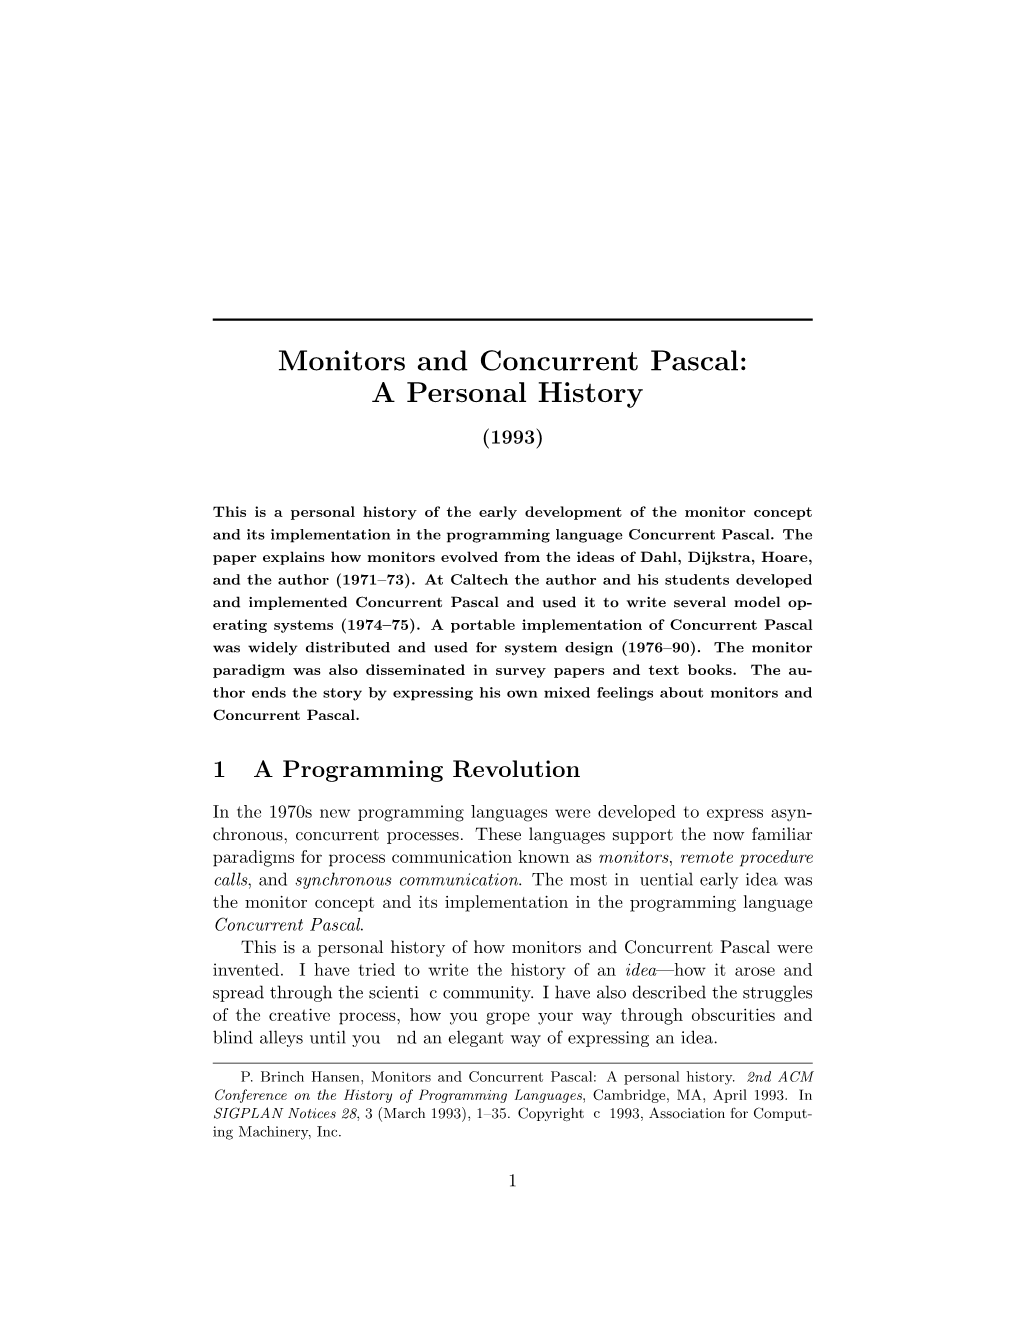 Monitors and Concurrent Pascal: a Personal History